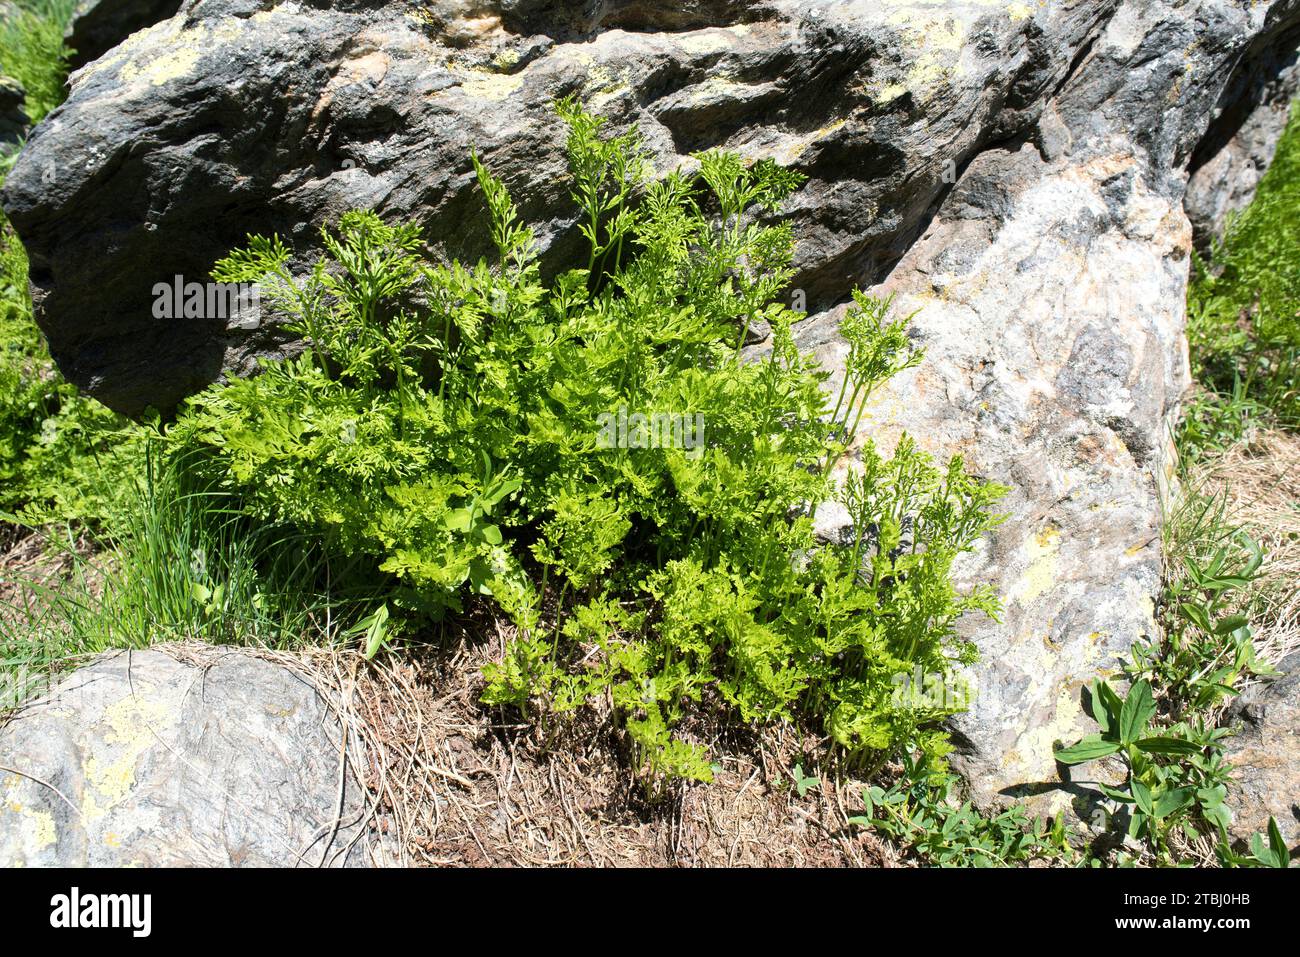 Parsley fern (Cryptogramma crispa) is a fern native to northern Europe and central and southern Europe mountains. This photo was taken in Andorra. Stock Photo